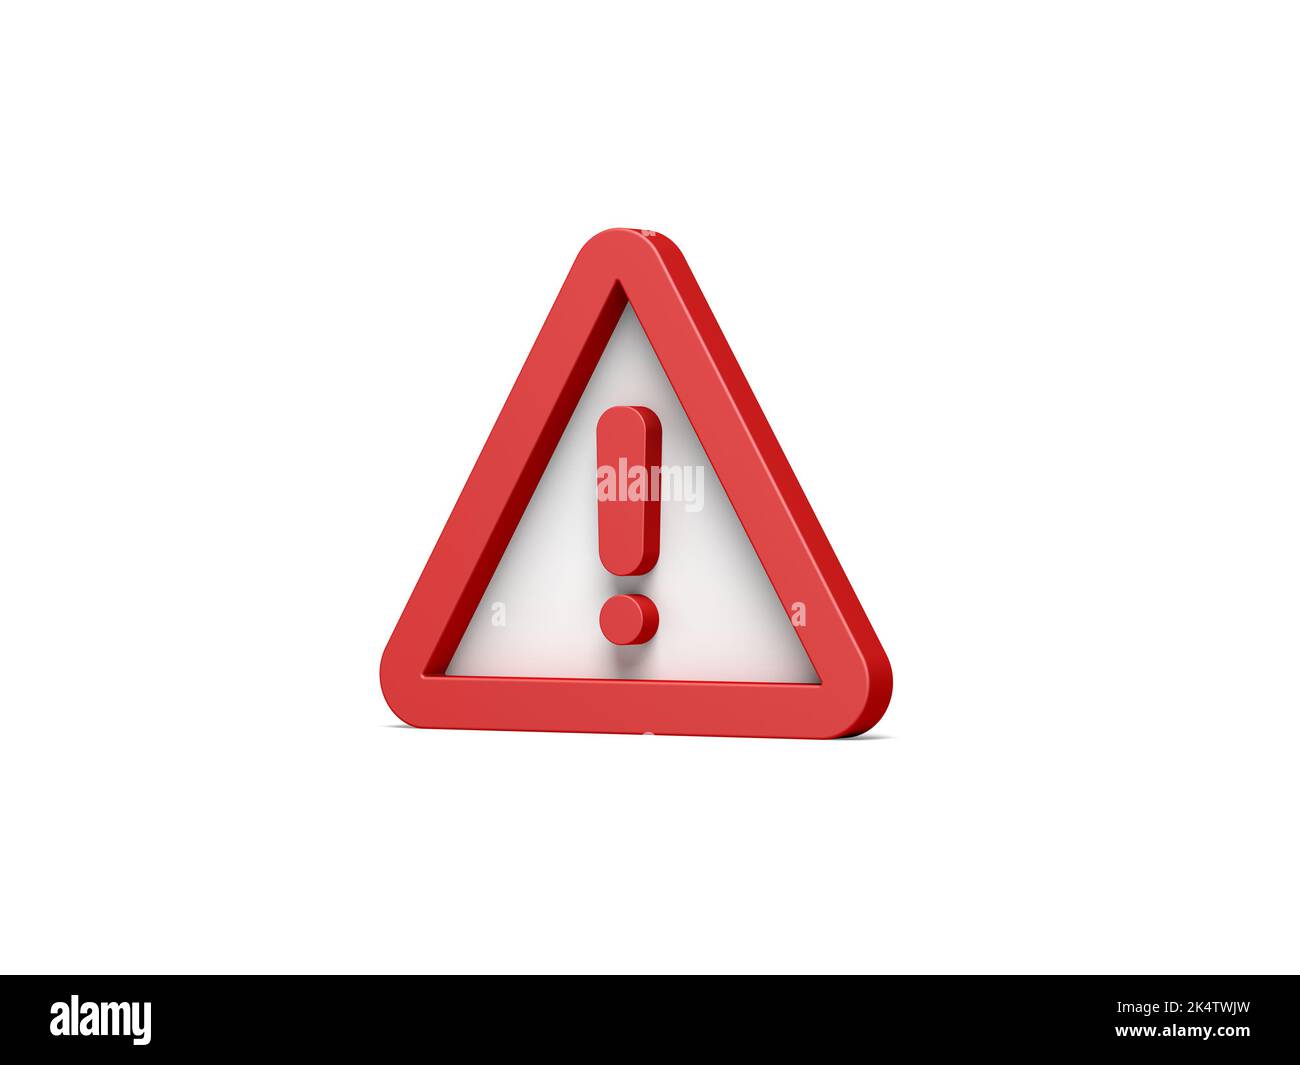 Red warning sign isolated on white background. Exclamation mark. Attention sign icon. Danger symbol. 3d illustration. Stock Photo